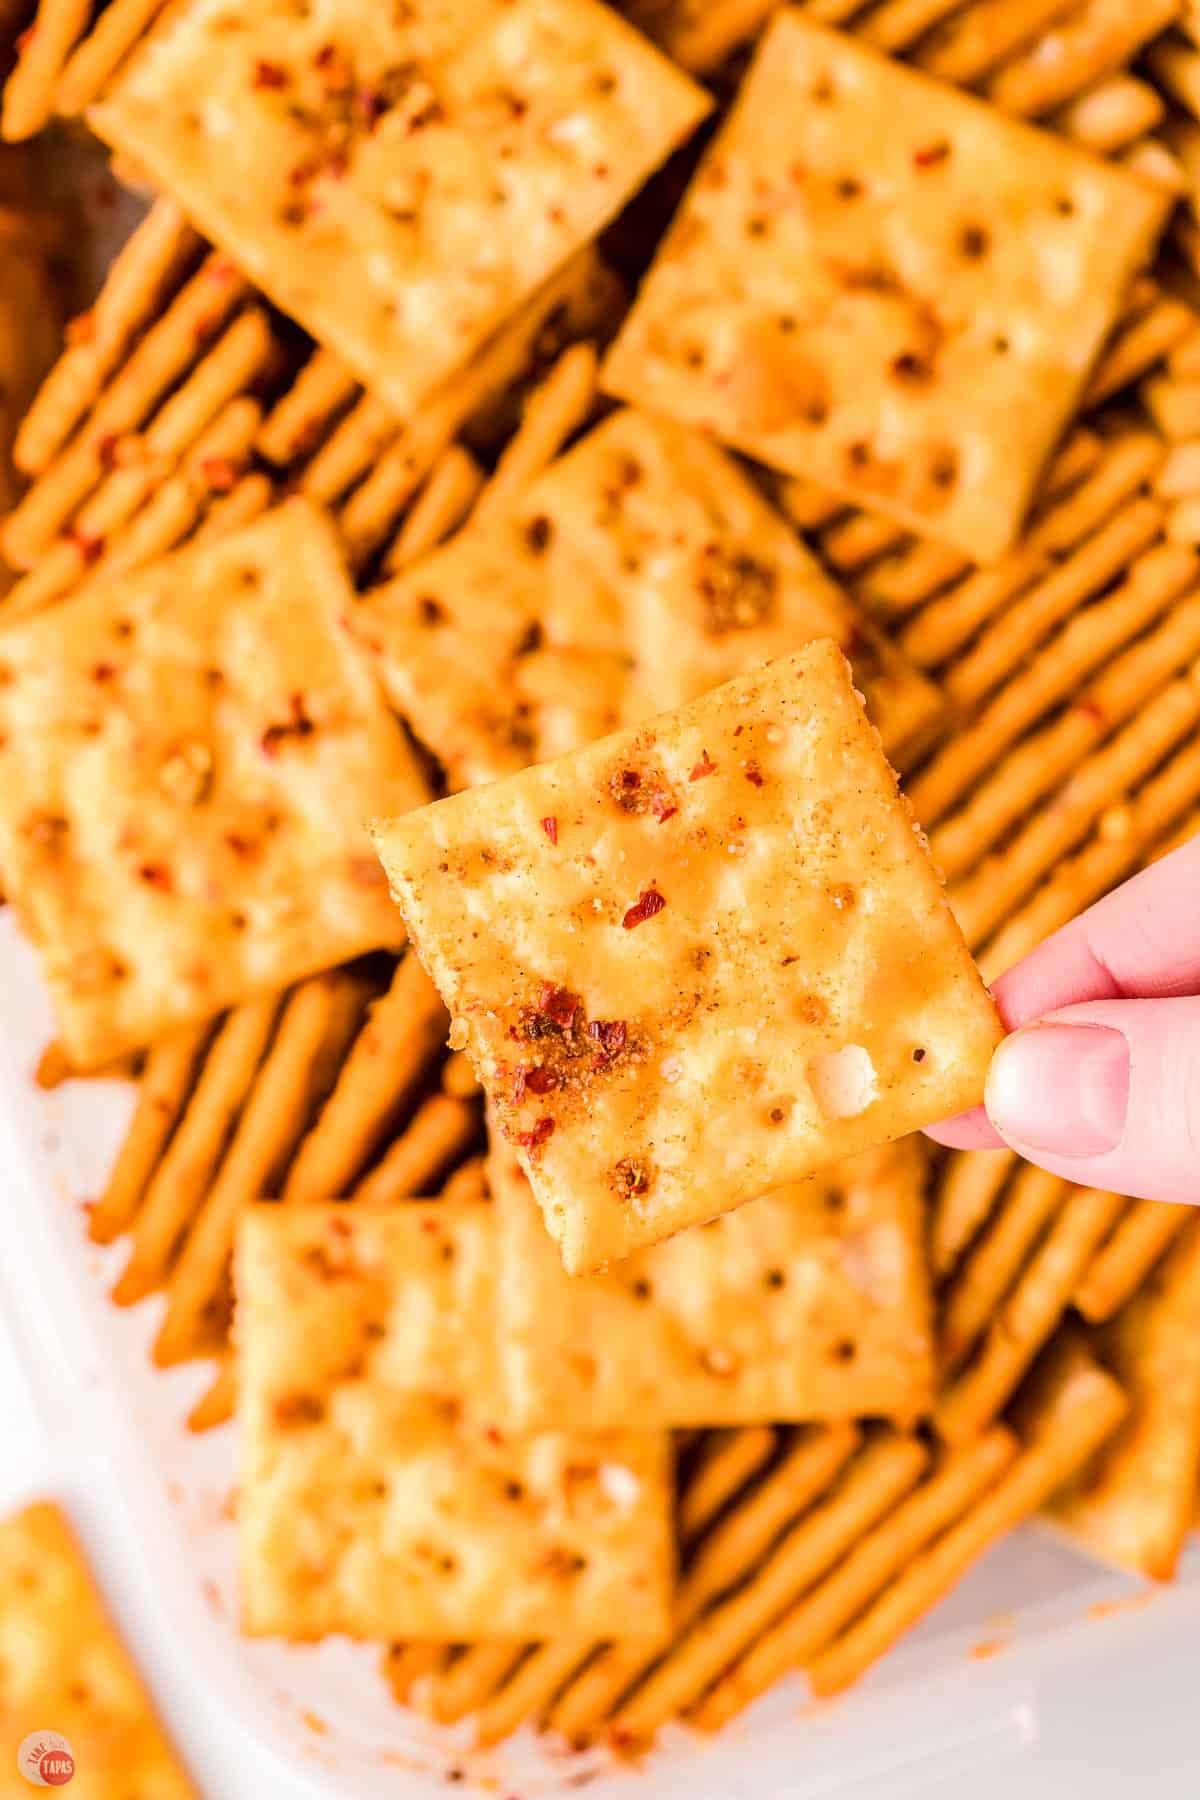 this spicy snack is great for road trips